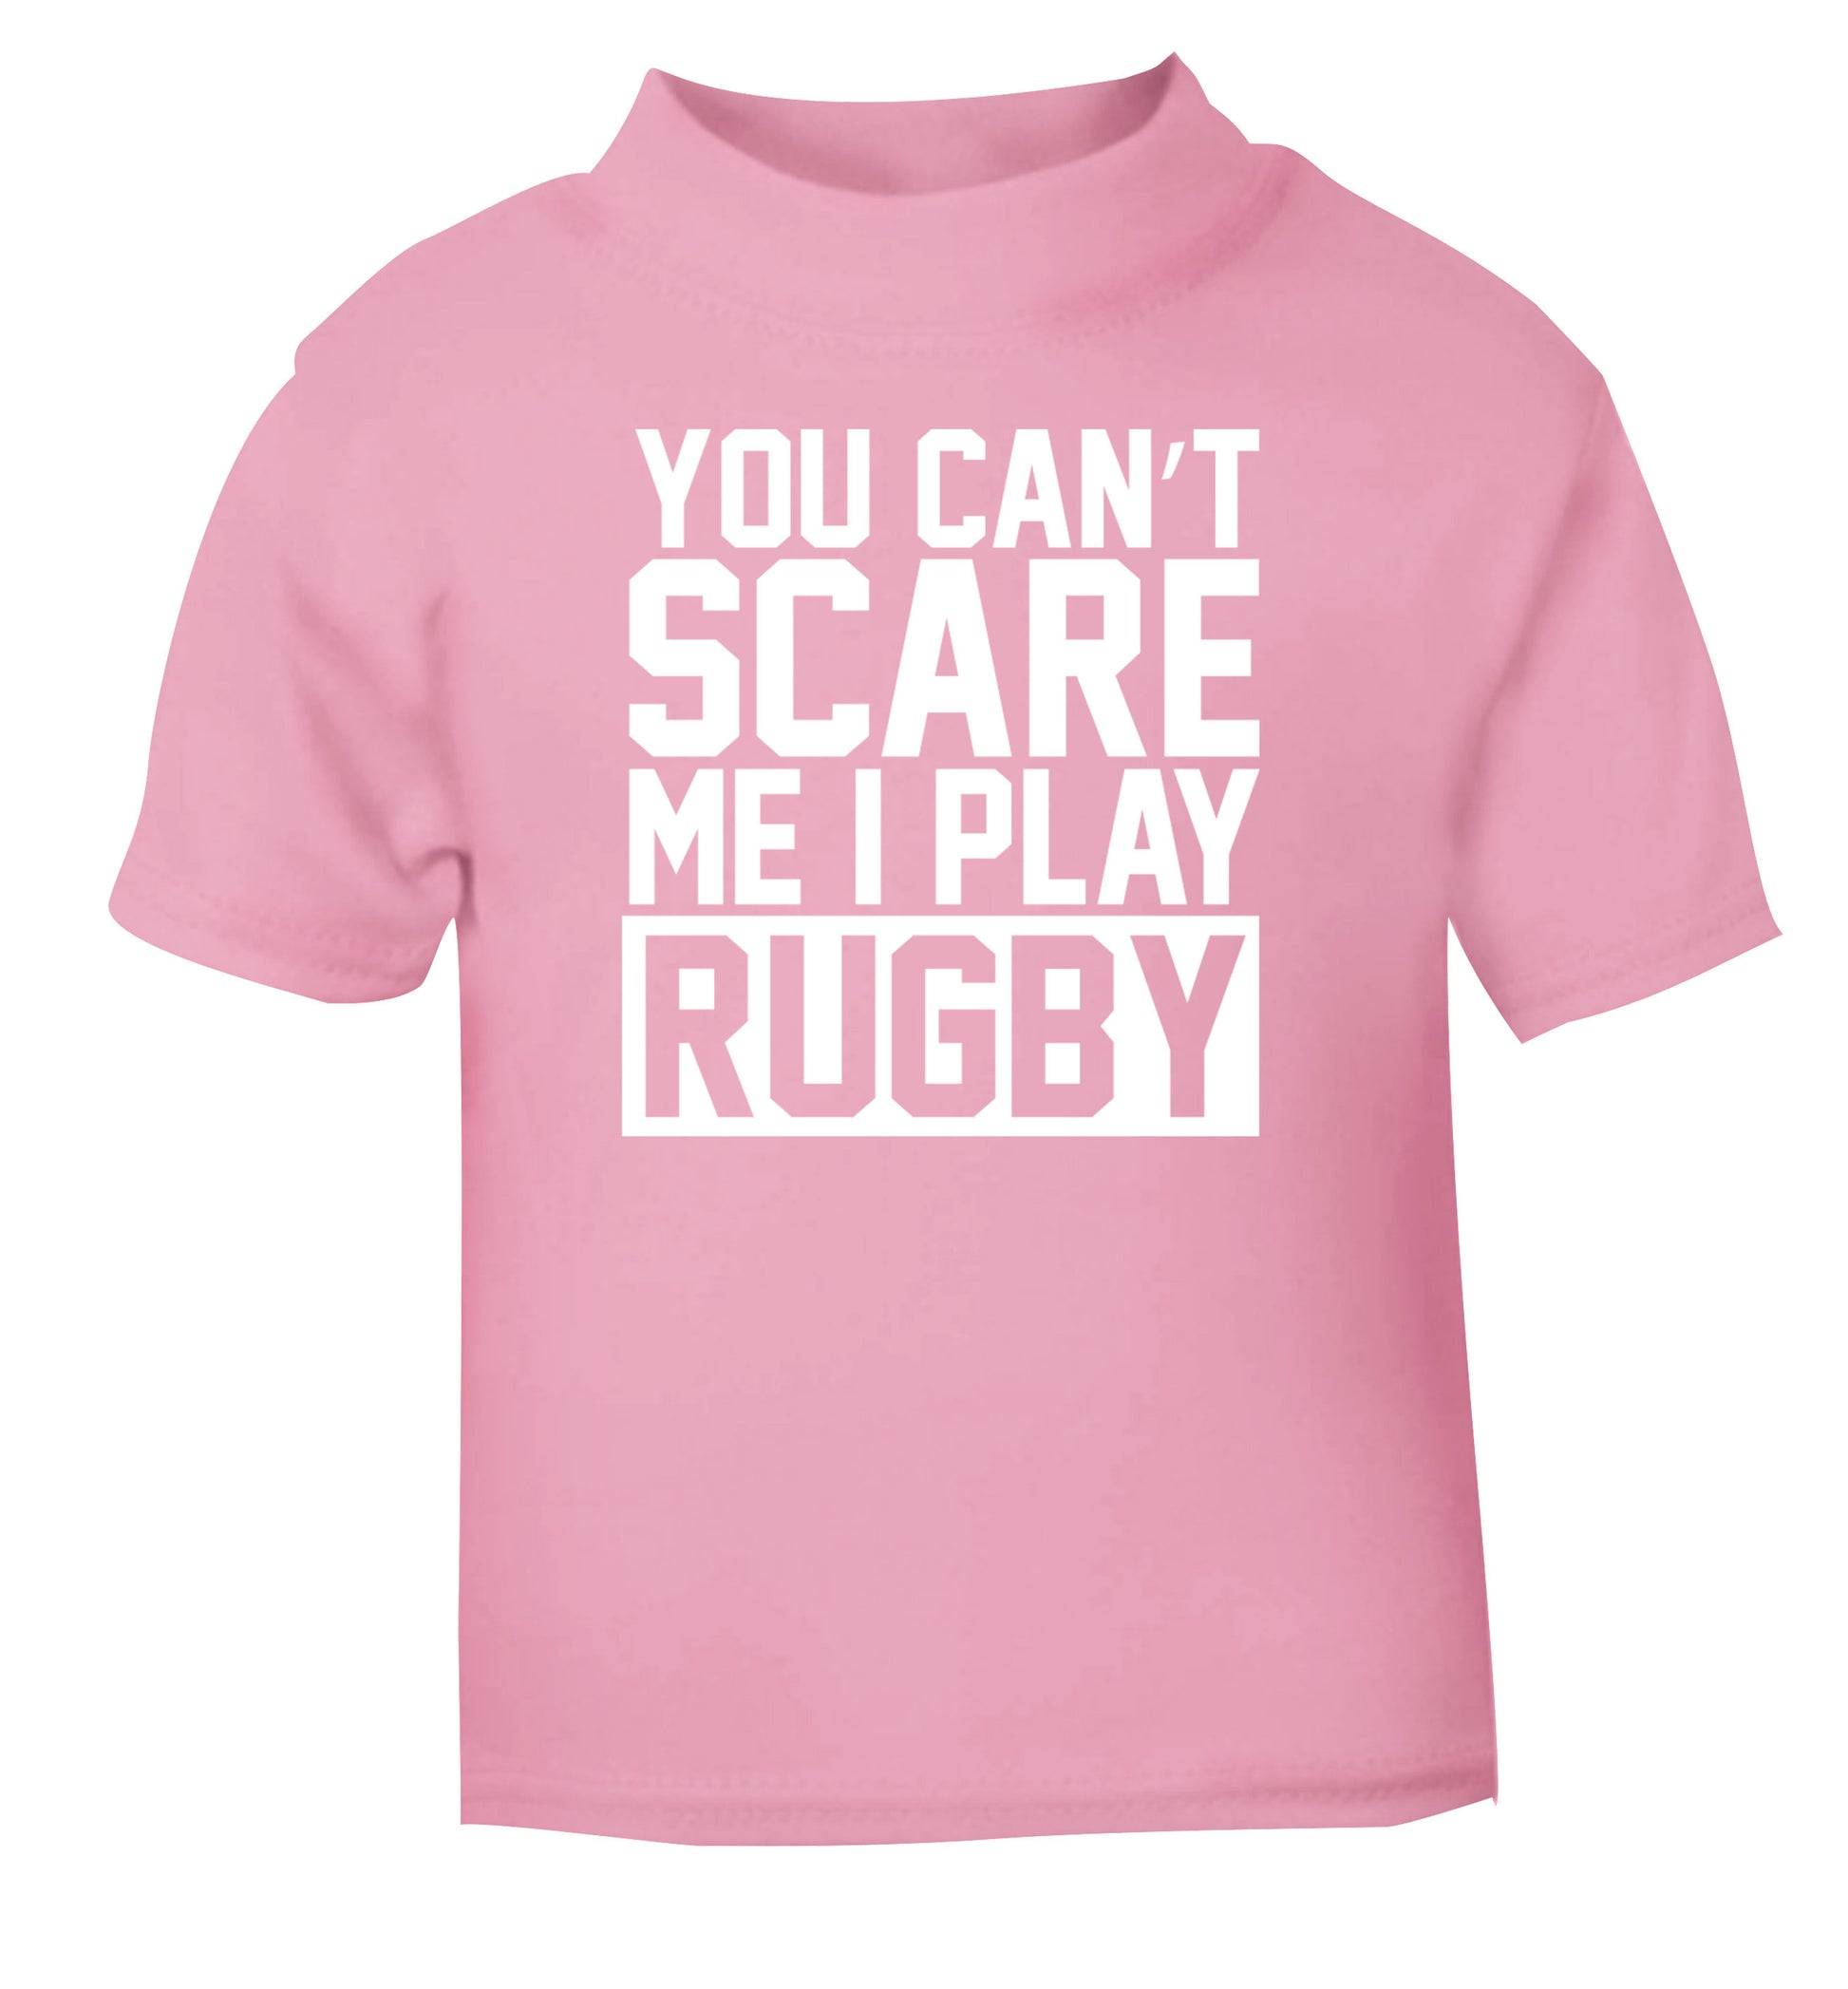 You can't scare me I play rugby light pink Baby Toddler Tshirt 2 Years